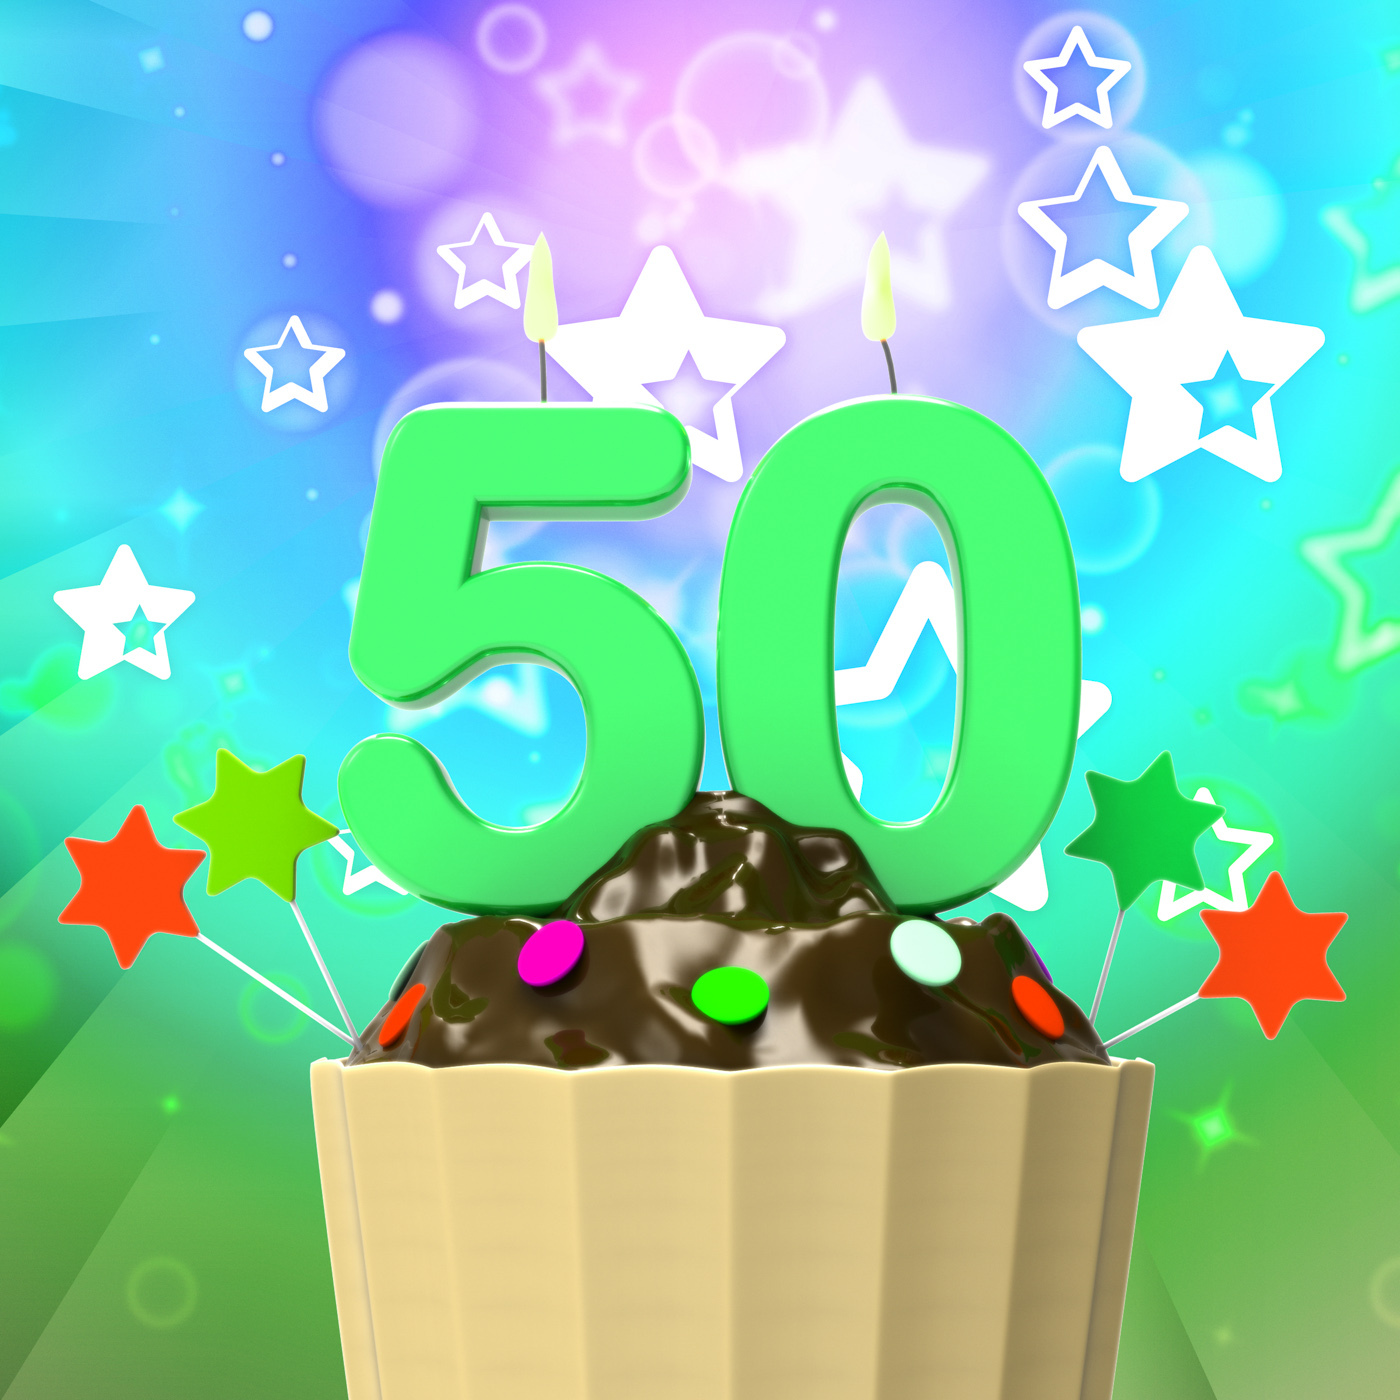 Fifty candle on cupcake means special celebration or colourful event photo